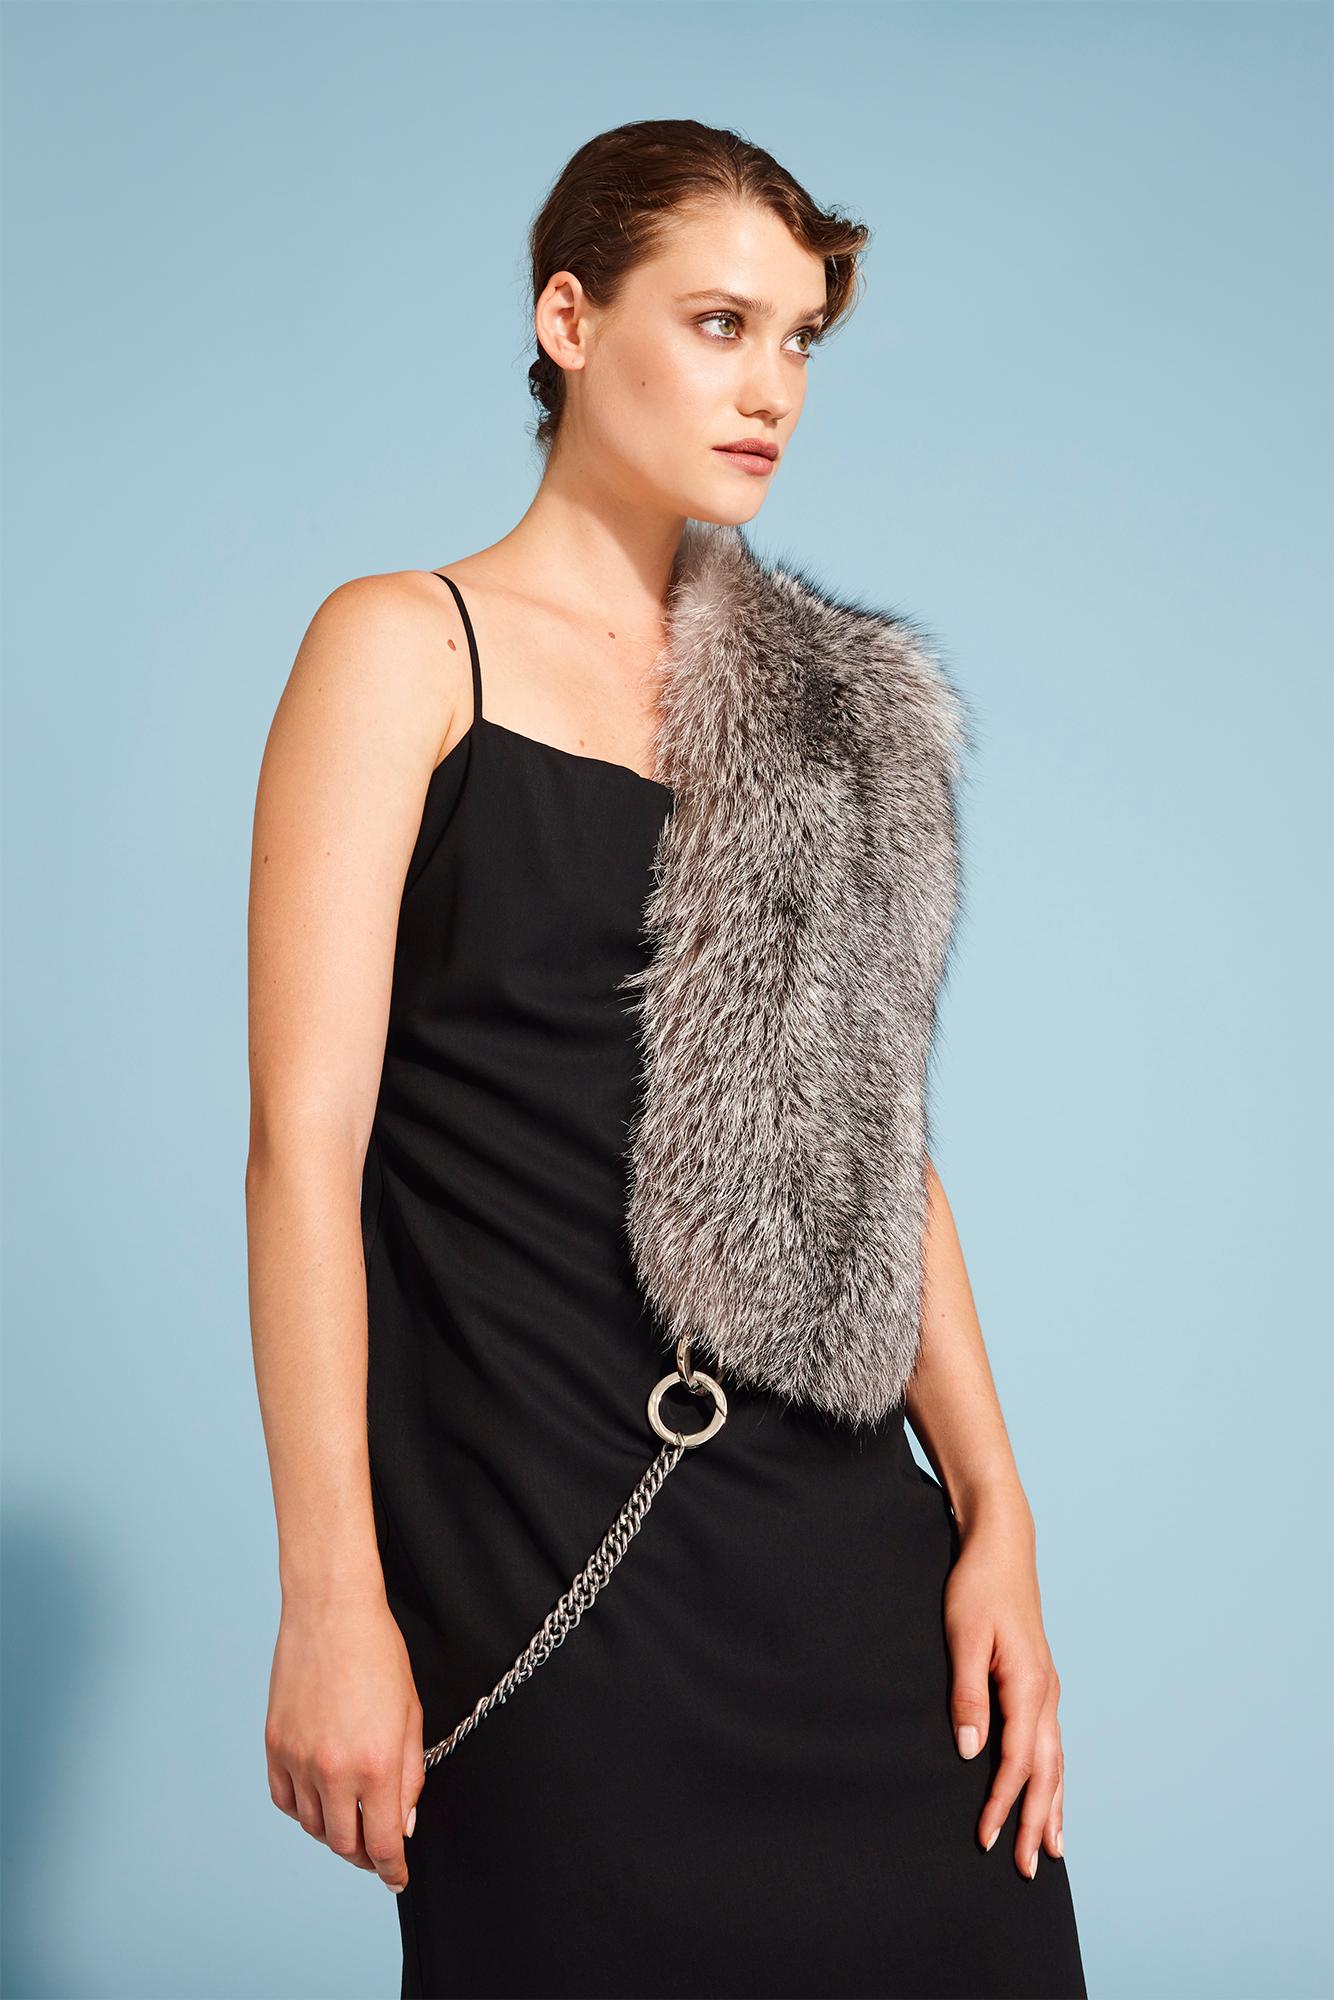 Chained Stole Collar Scarf Fox Fur & Silk Lining with Chain 

PRODUCT DETAILS

The chained stole is Verheyen London’s new creation for the classic or biker chic look. To be worn with or without a chain, this versatile stole will take you from a